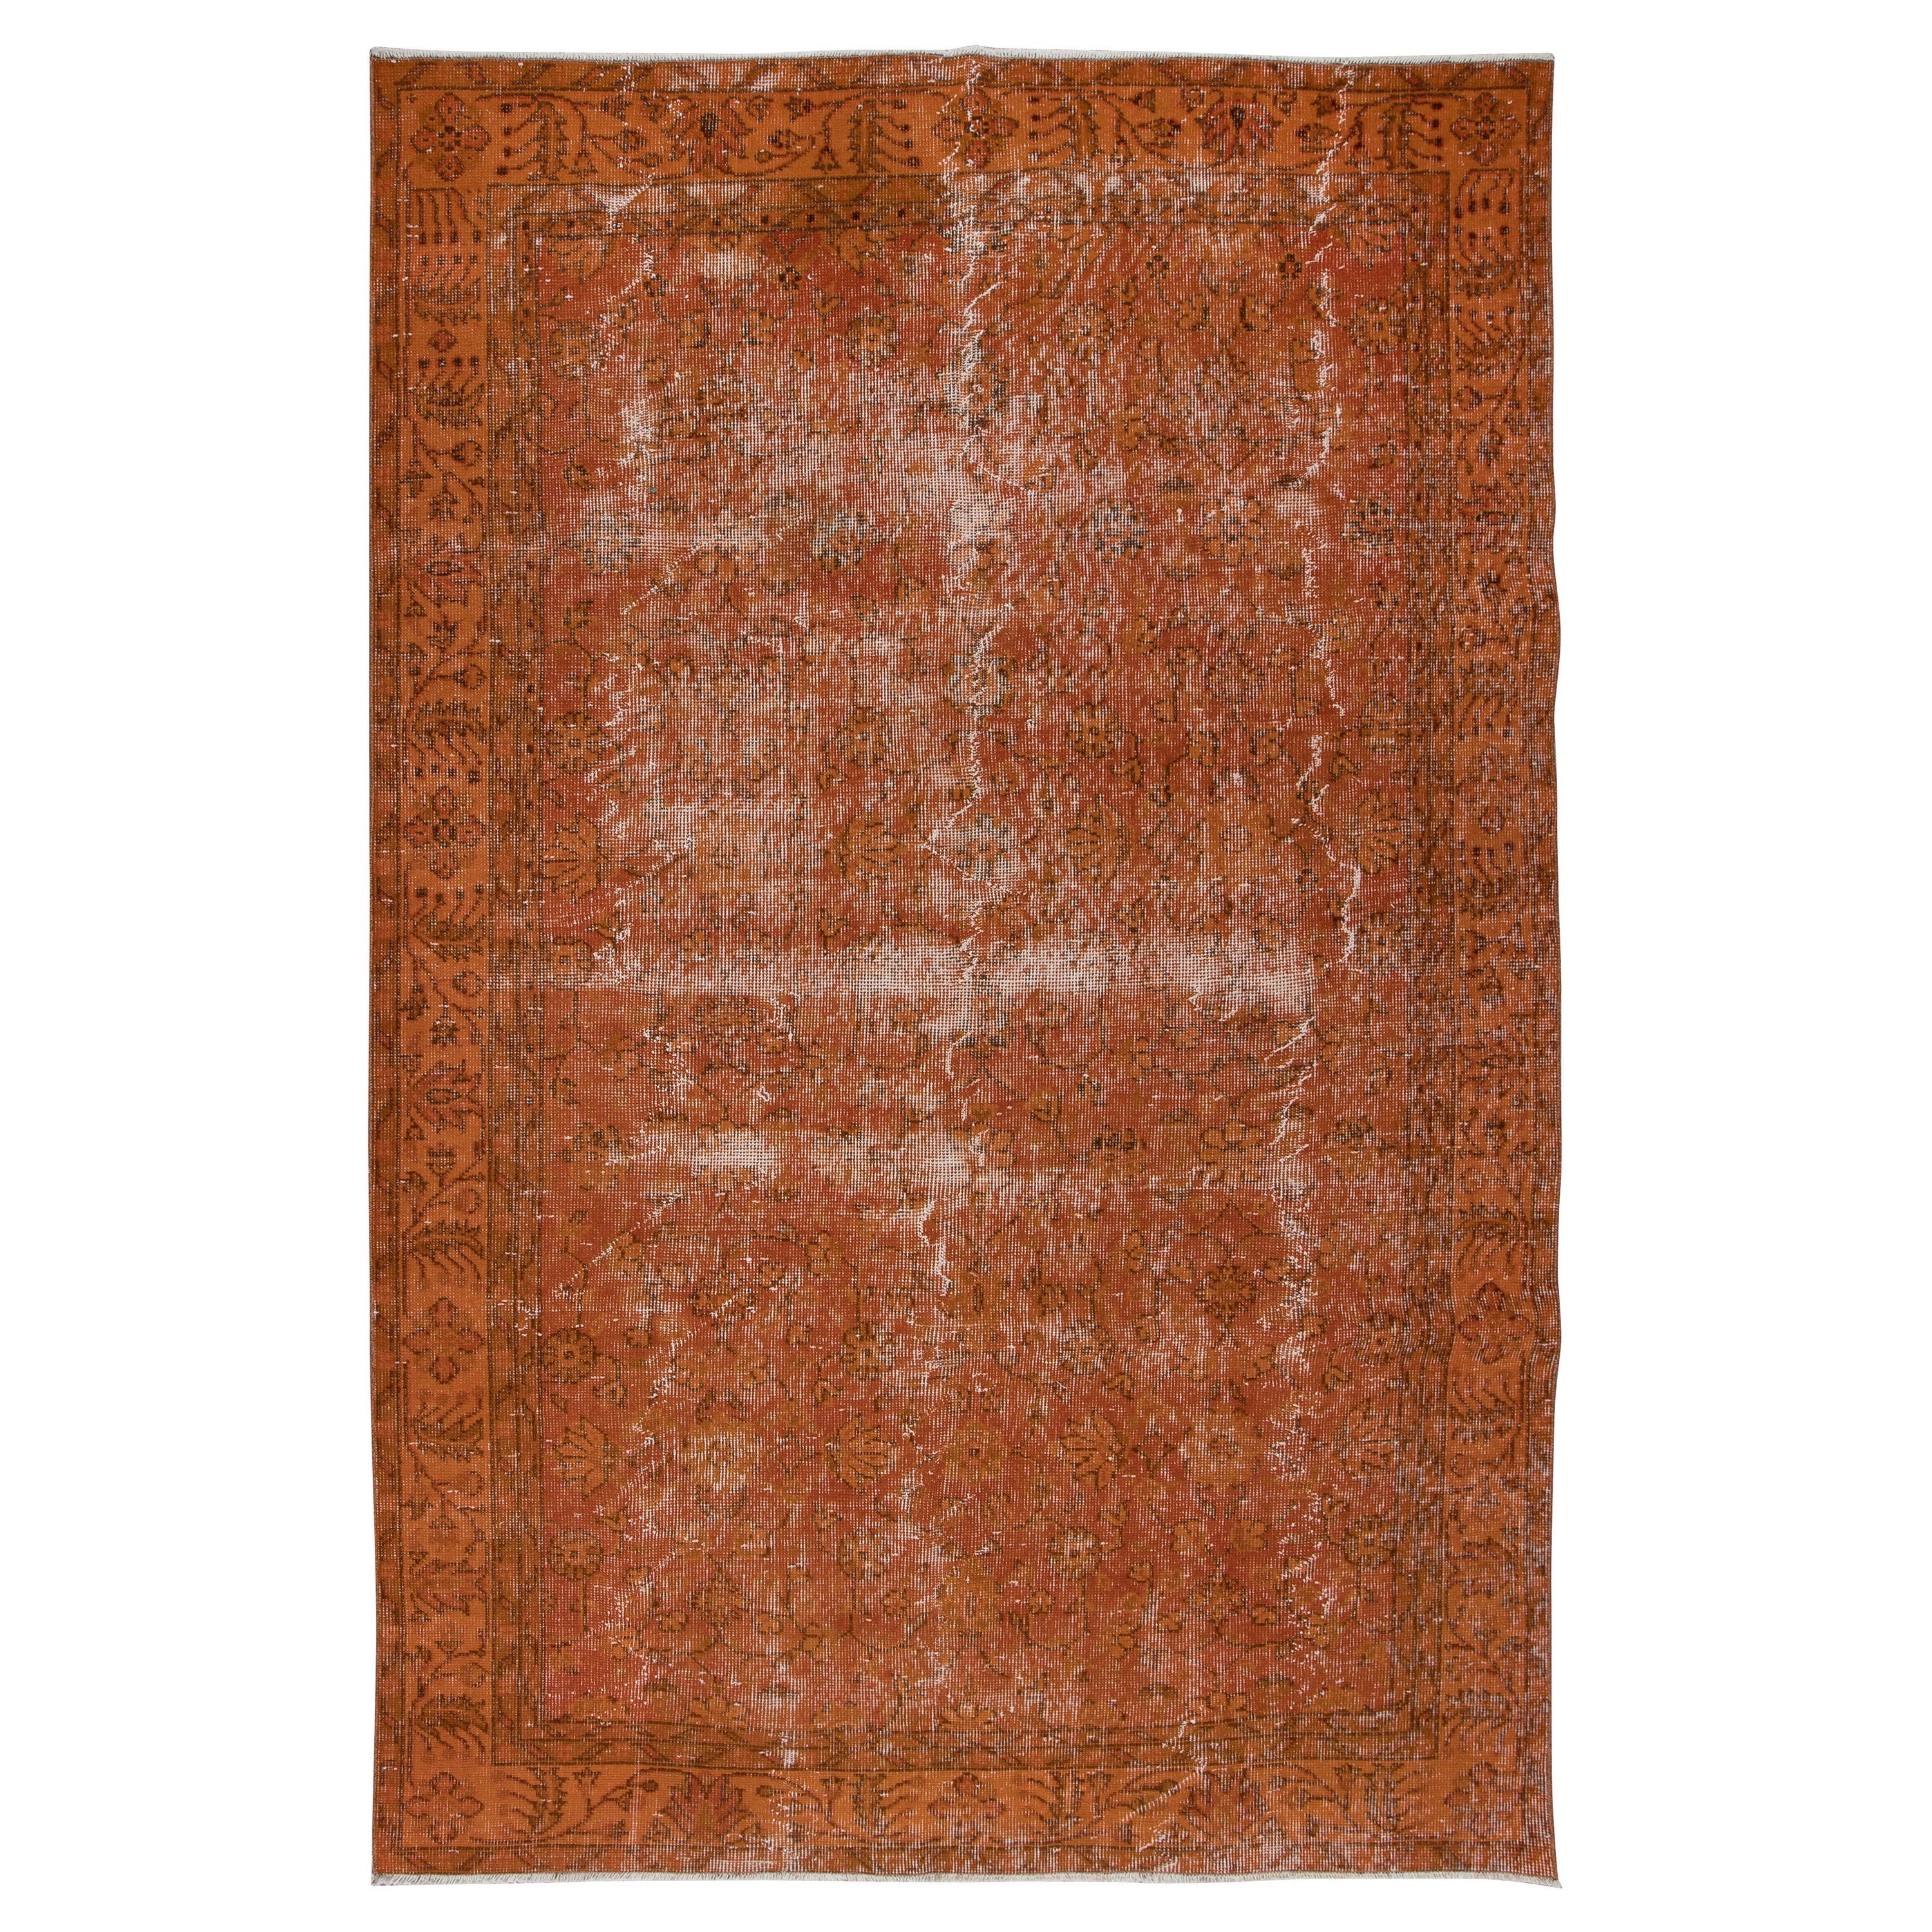 5.8x8.7 Ft Decorative Handmade Turkish Area Rug in Orange with Shabby Chic Style